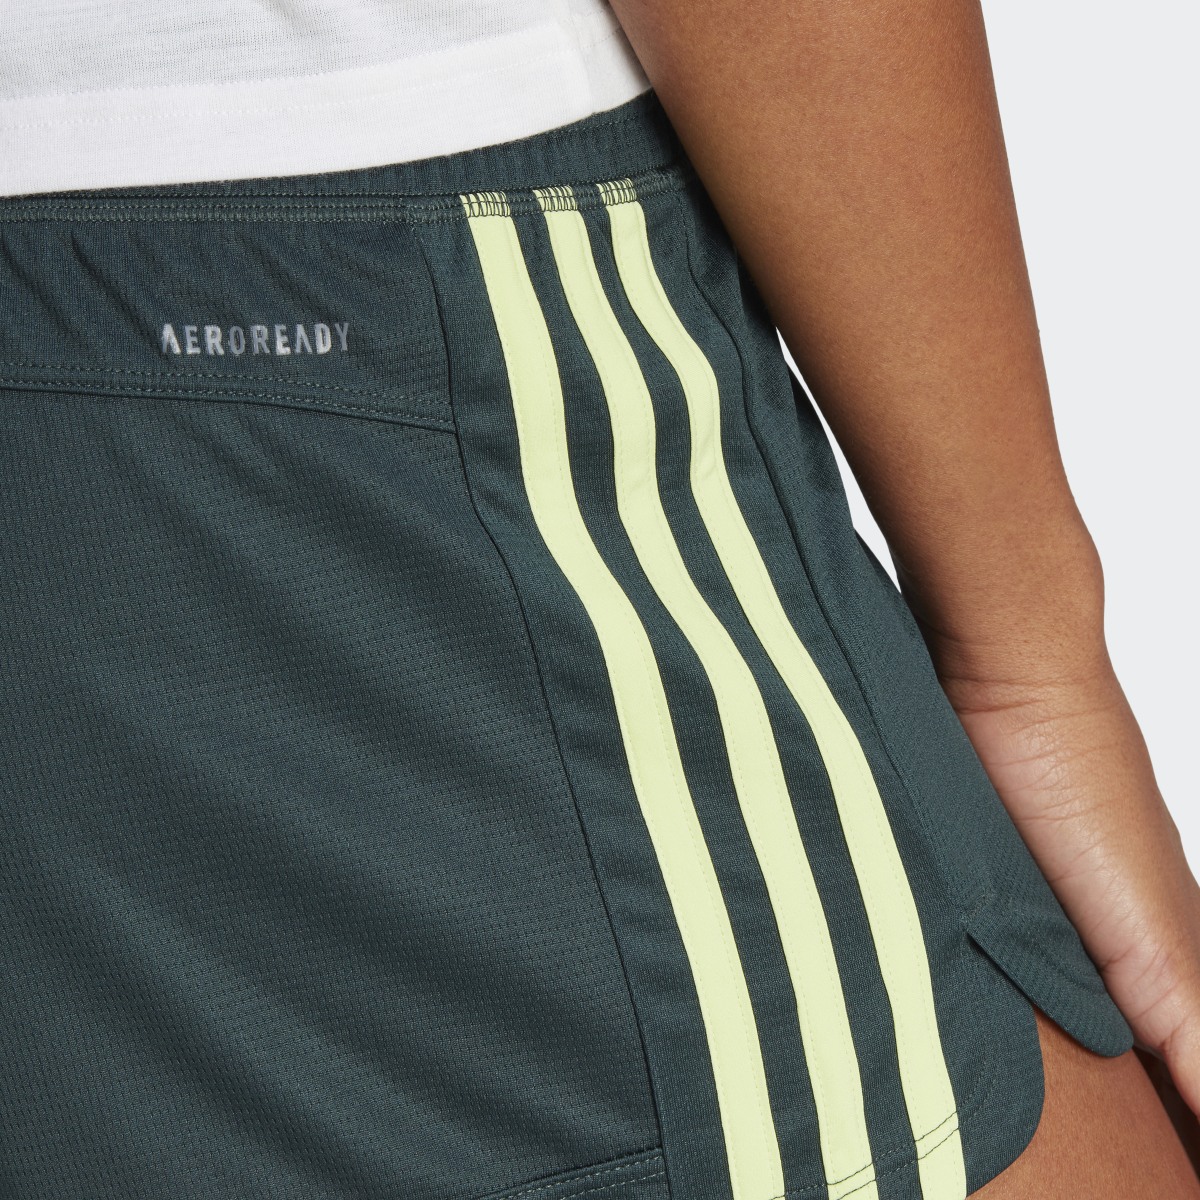 Adidas Pacer 3-Stripes Knit Shorts. 5